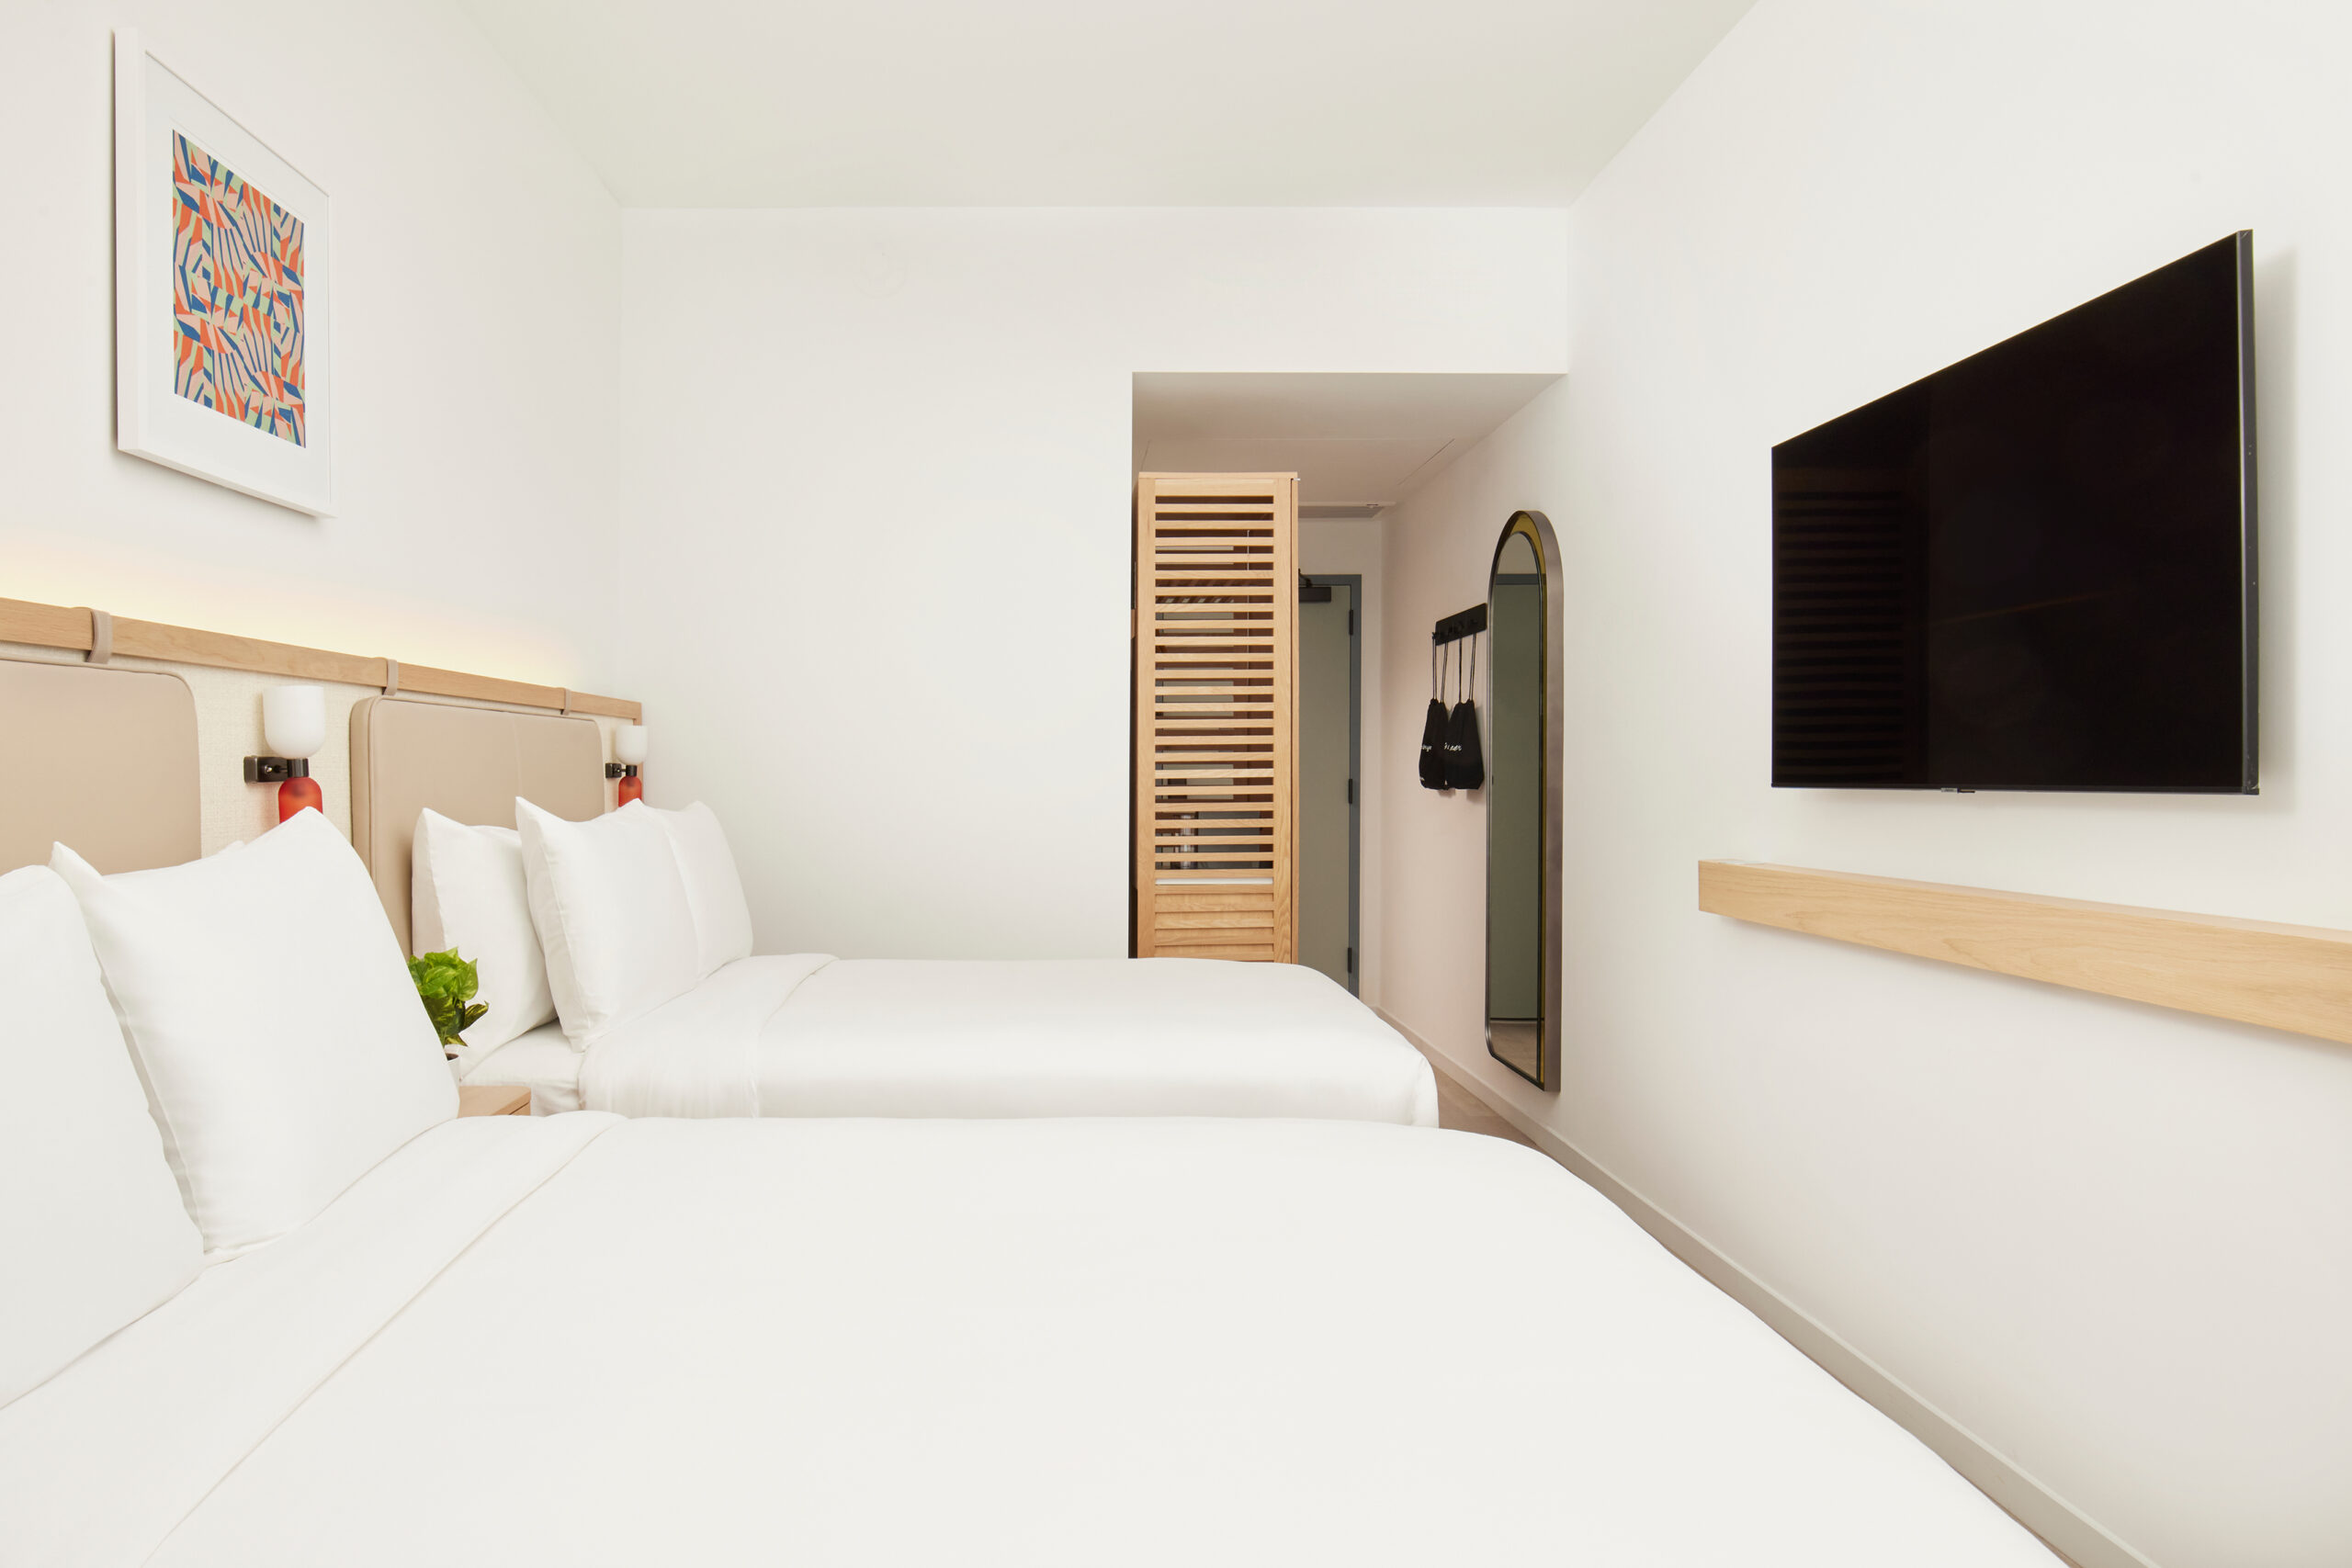 Arlo Wynwood Two Double hotel room beds, television, and entryway